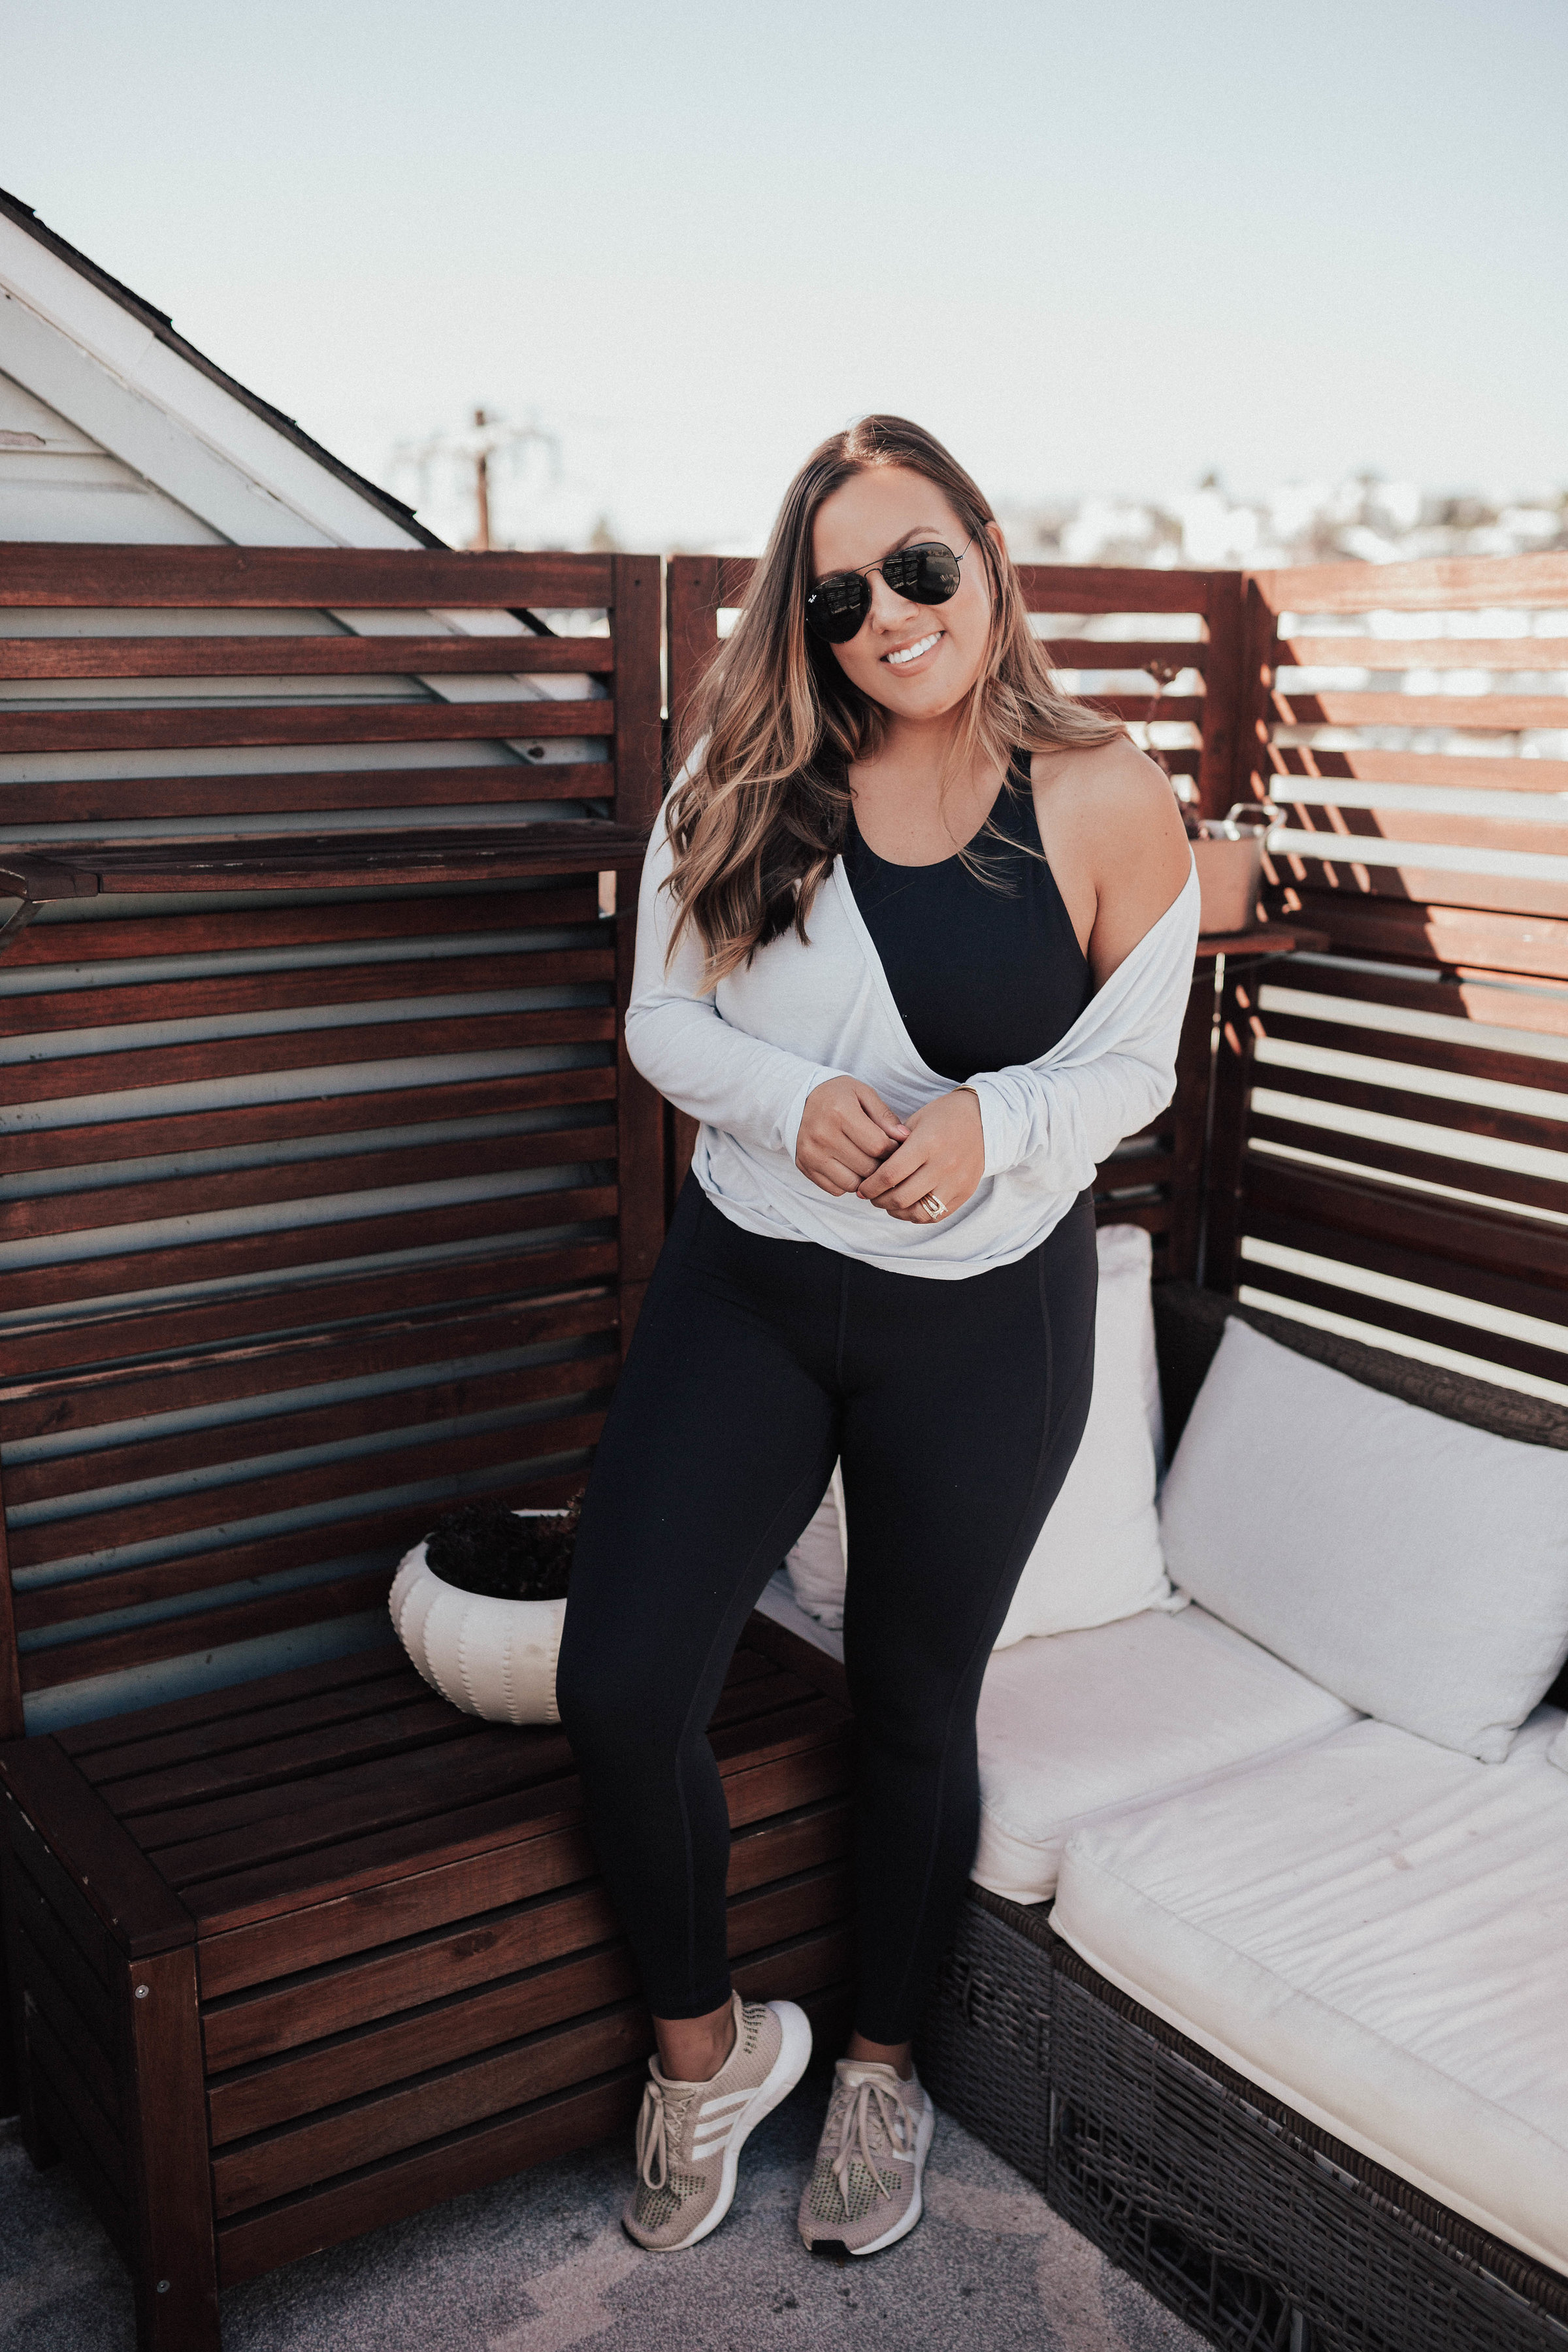 Ashley Zeal talks about her new favorite leggings from Girlfriend Collective: A Brand with Integrity. Shop this brand without feeling any remorse!